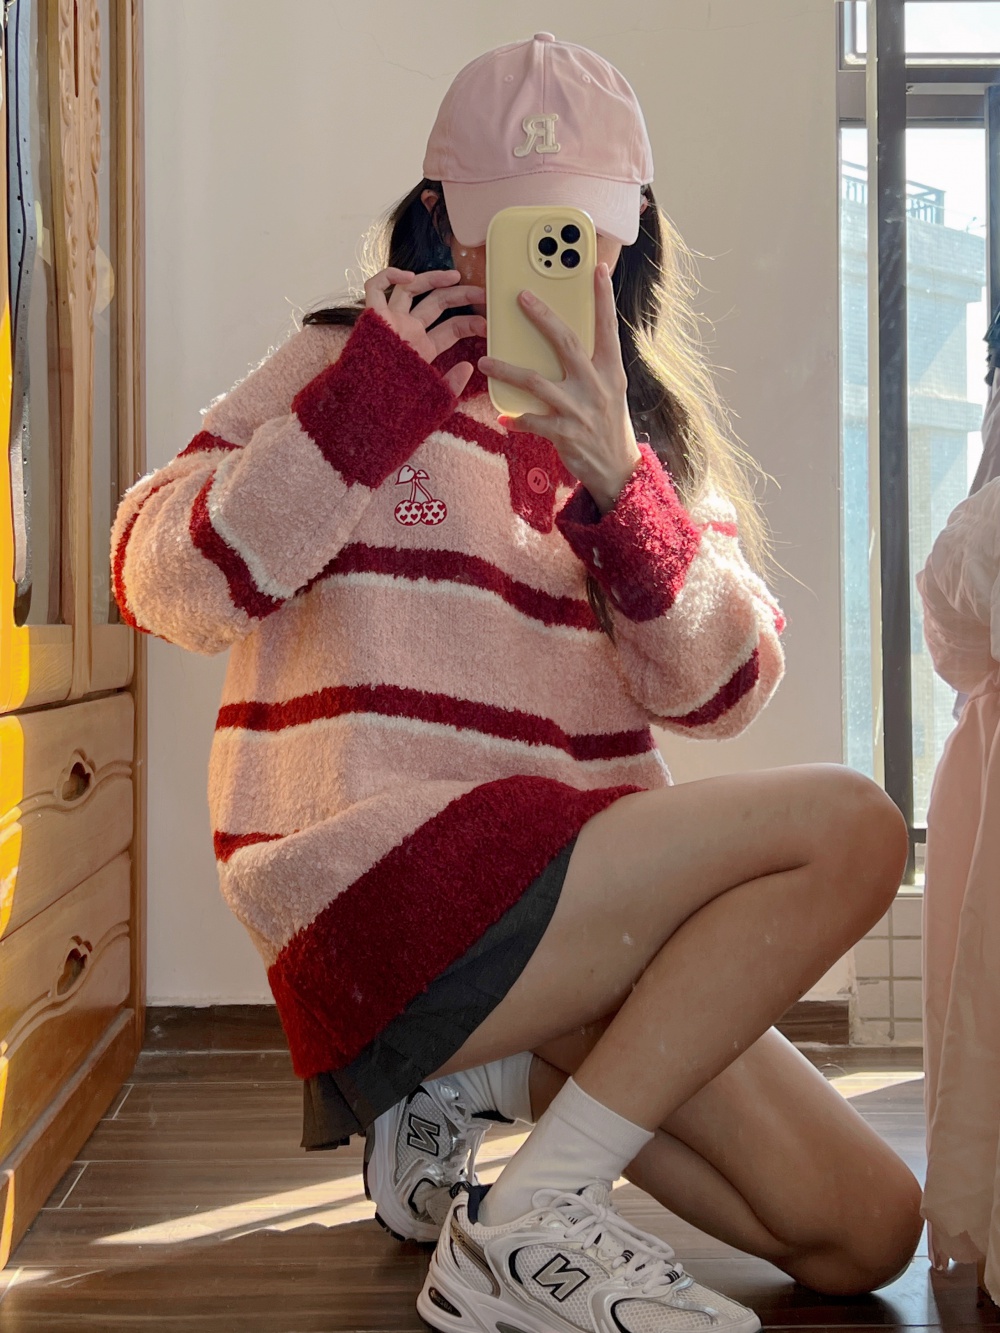 Stripe quality loose knitted cherry sweater